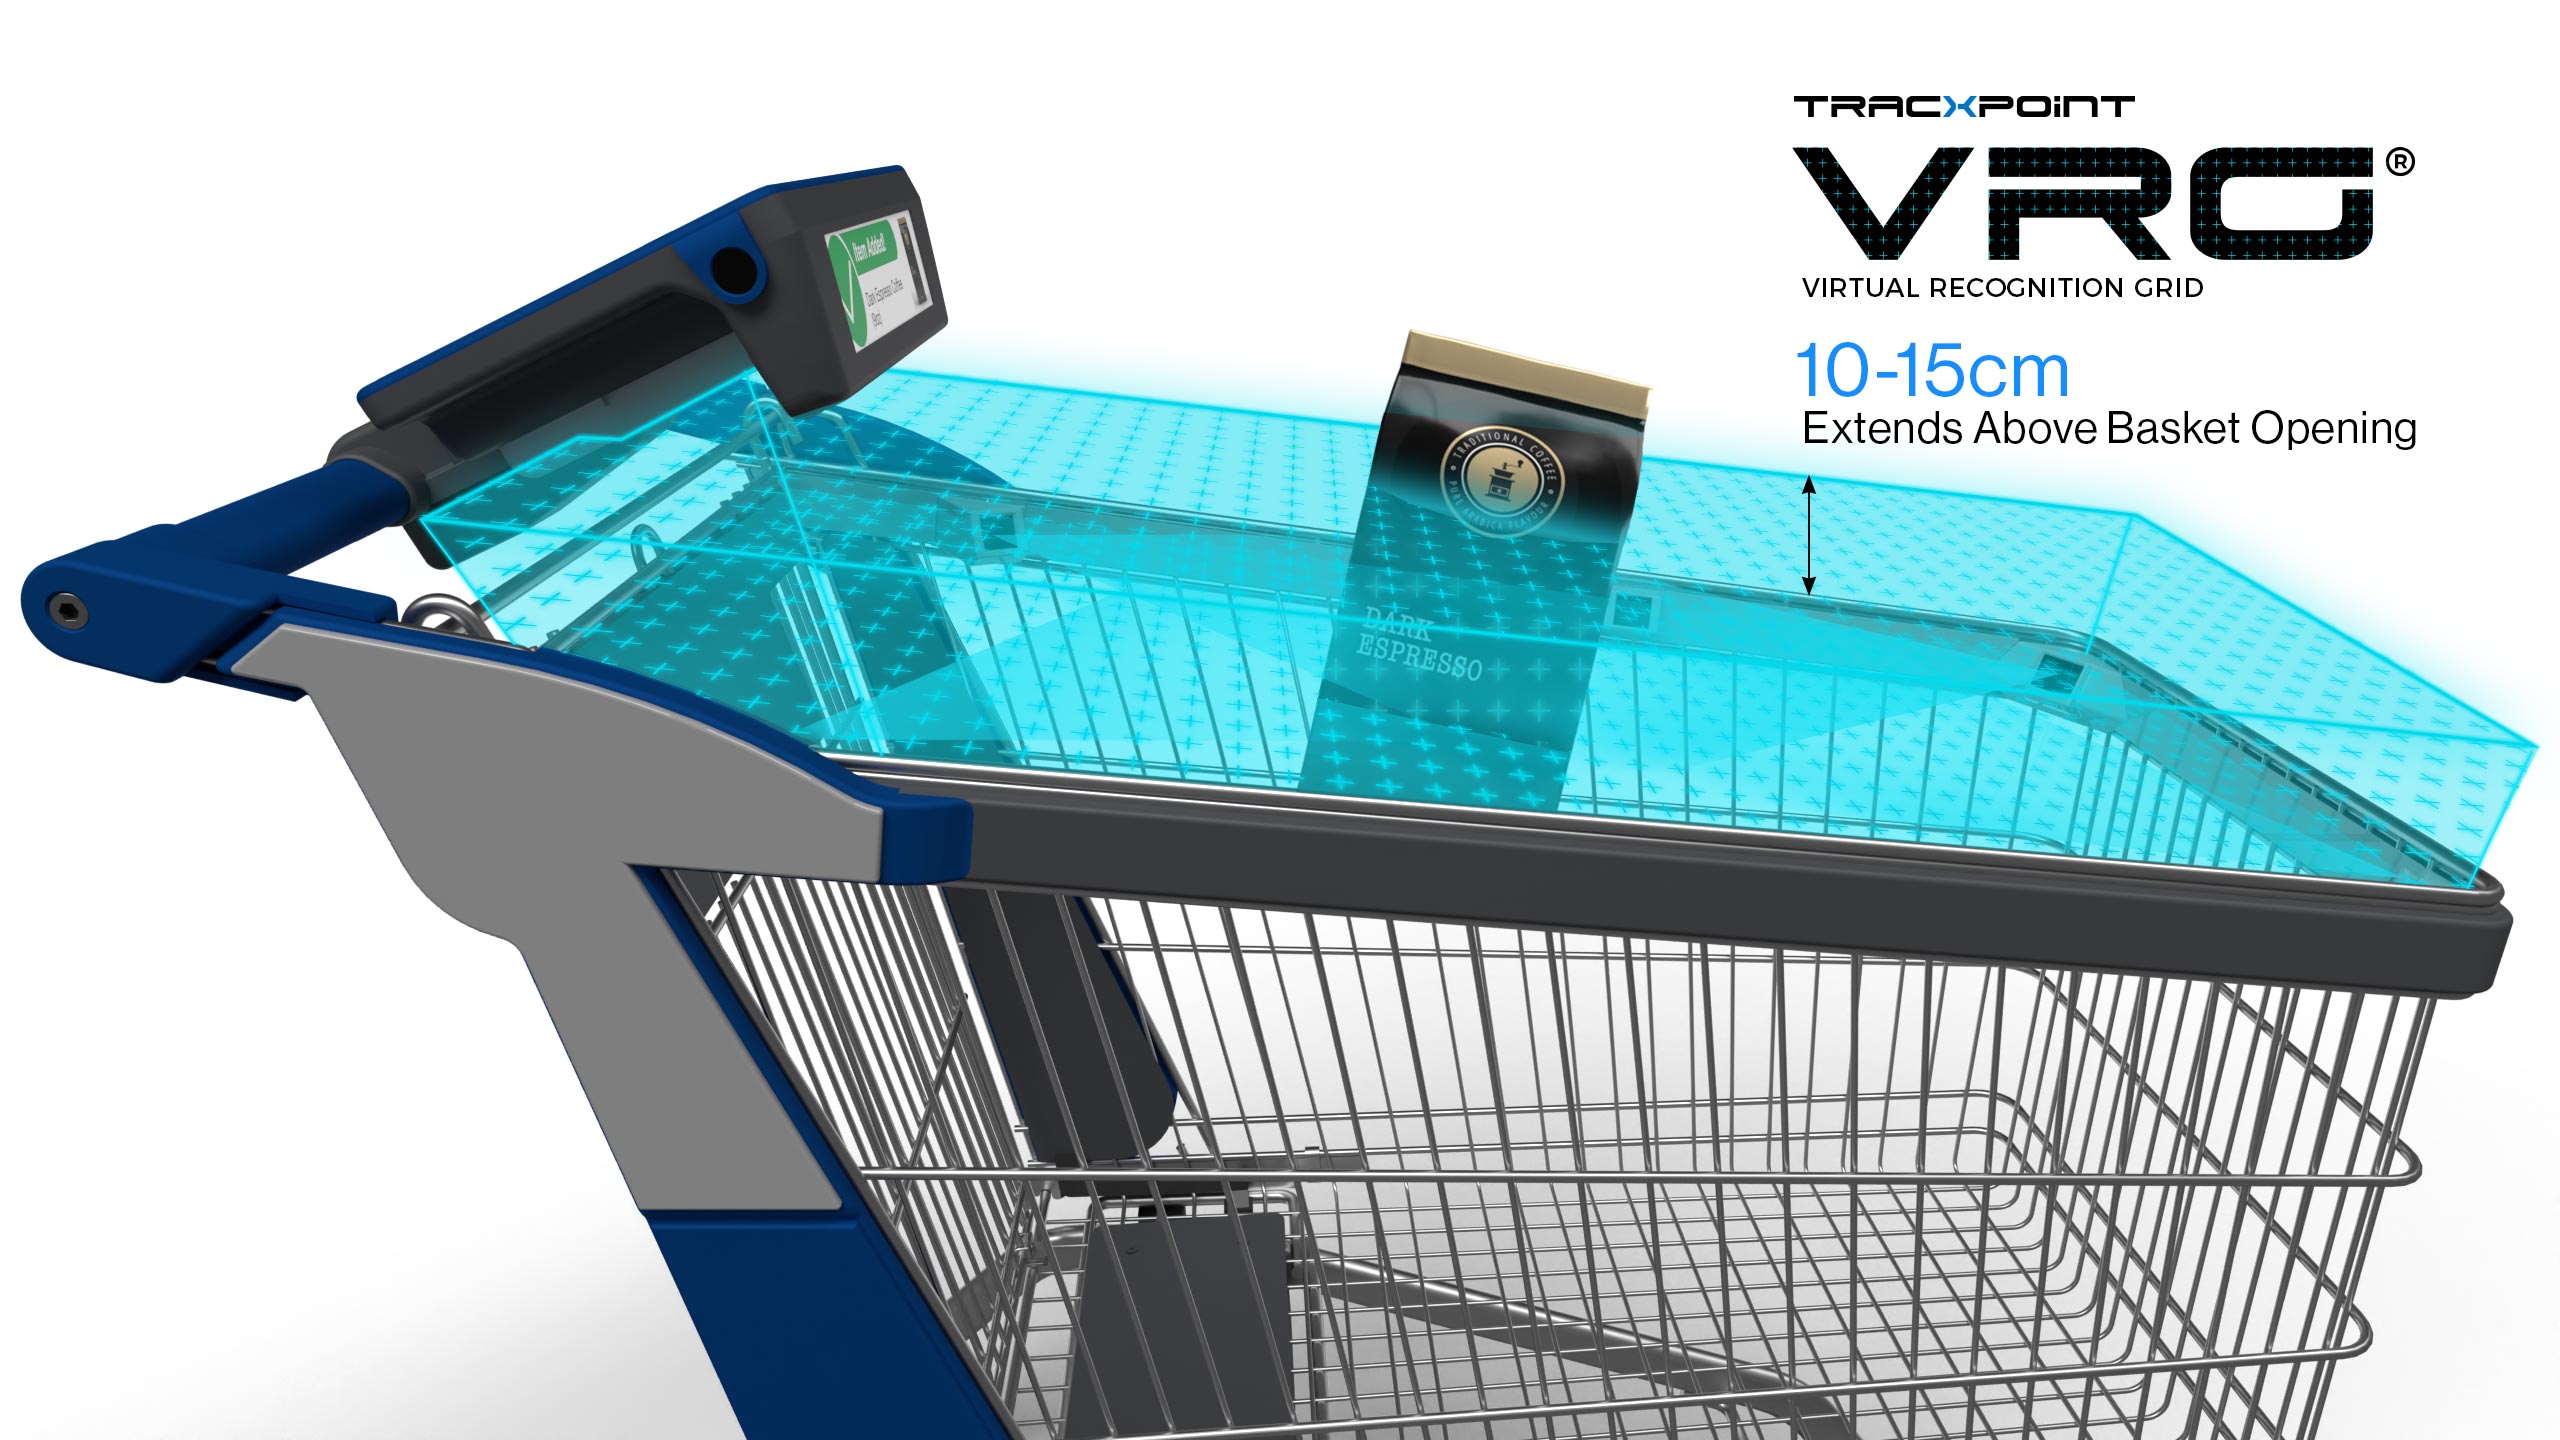 Smart Shopping Trolley from Tracxpoint with Computer Vision recognizes products instantly